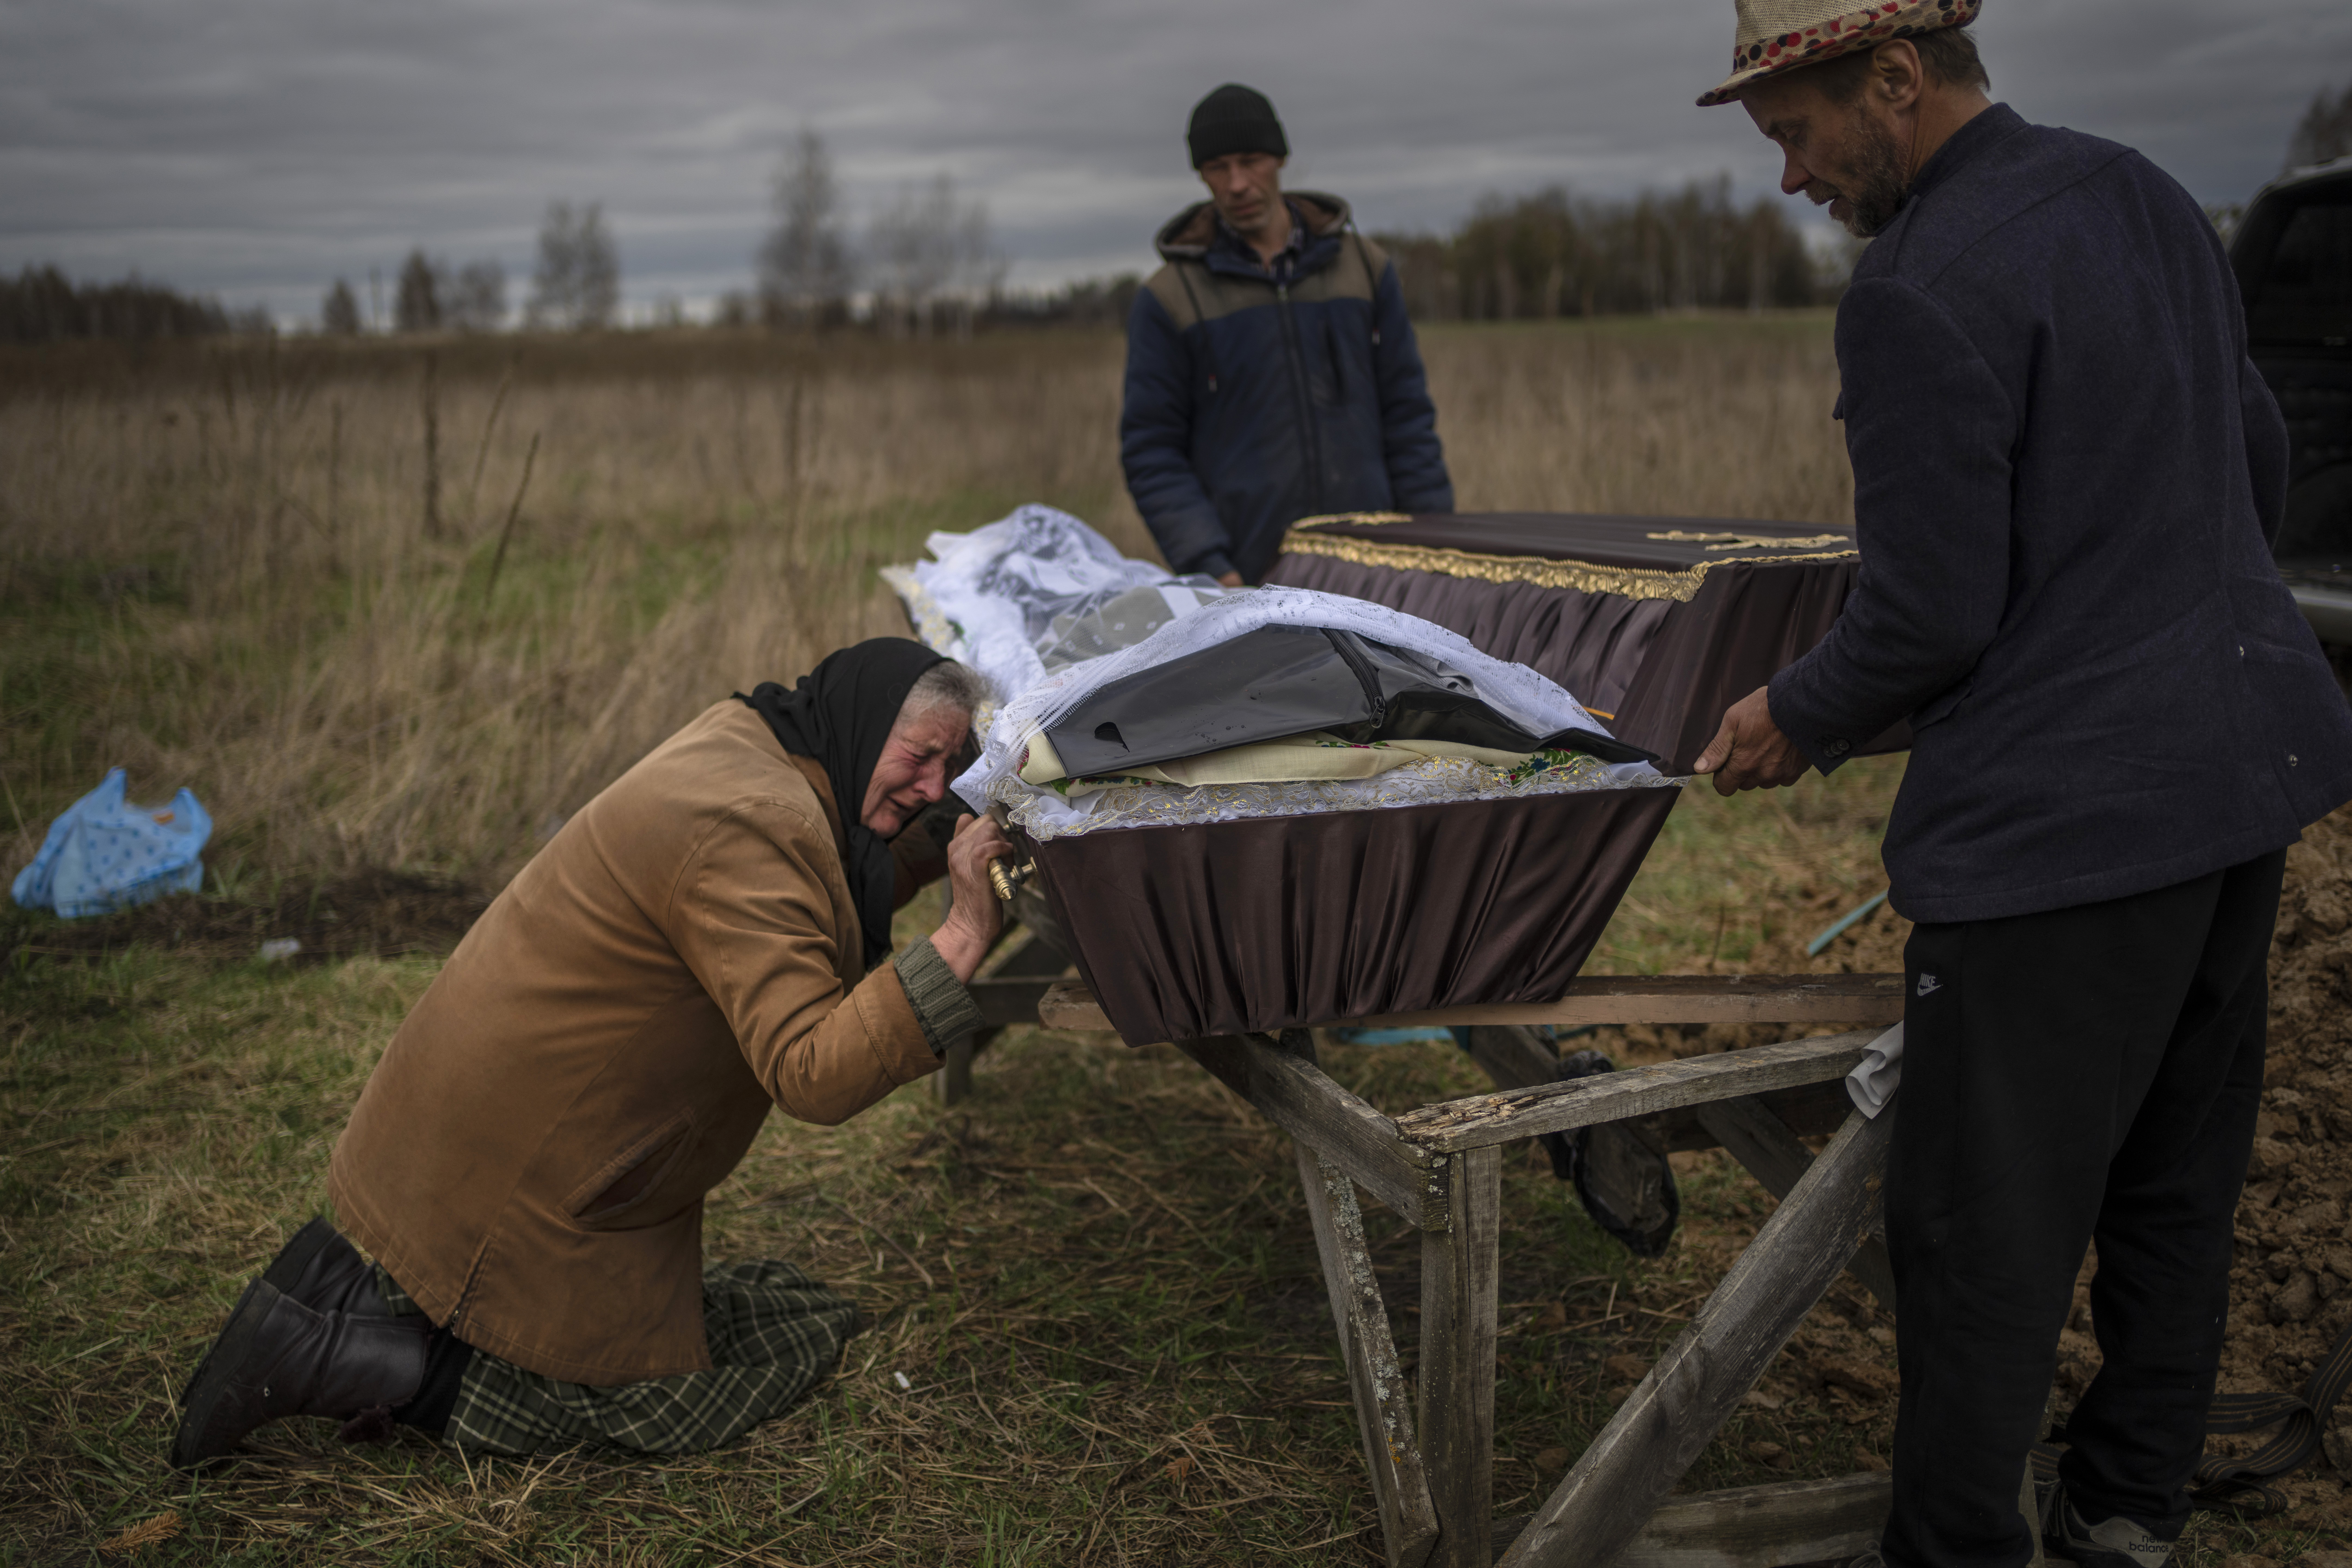 70-year-old Nadia Trupchaninova mourns the death of her son Vadim, 48, who was killed by Russian soldiers in Pucha (AP Photo / Rodrigo Abd)